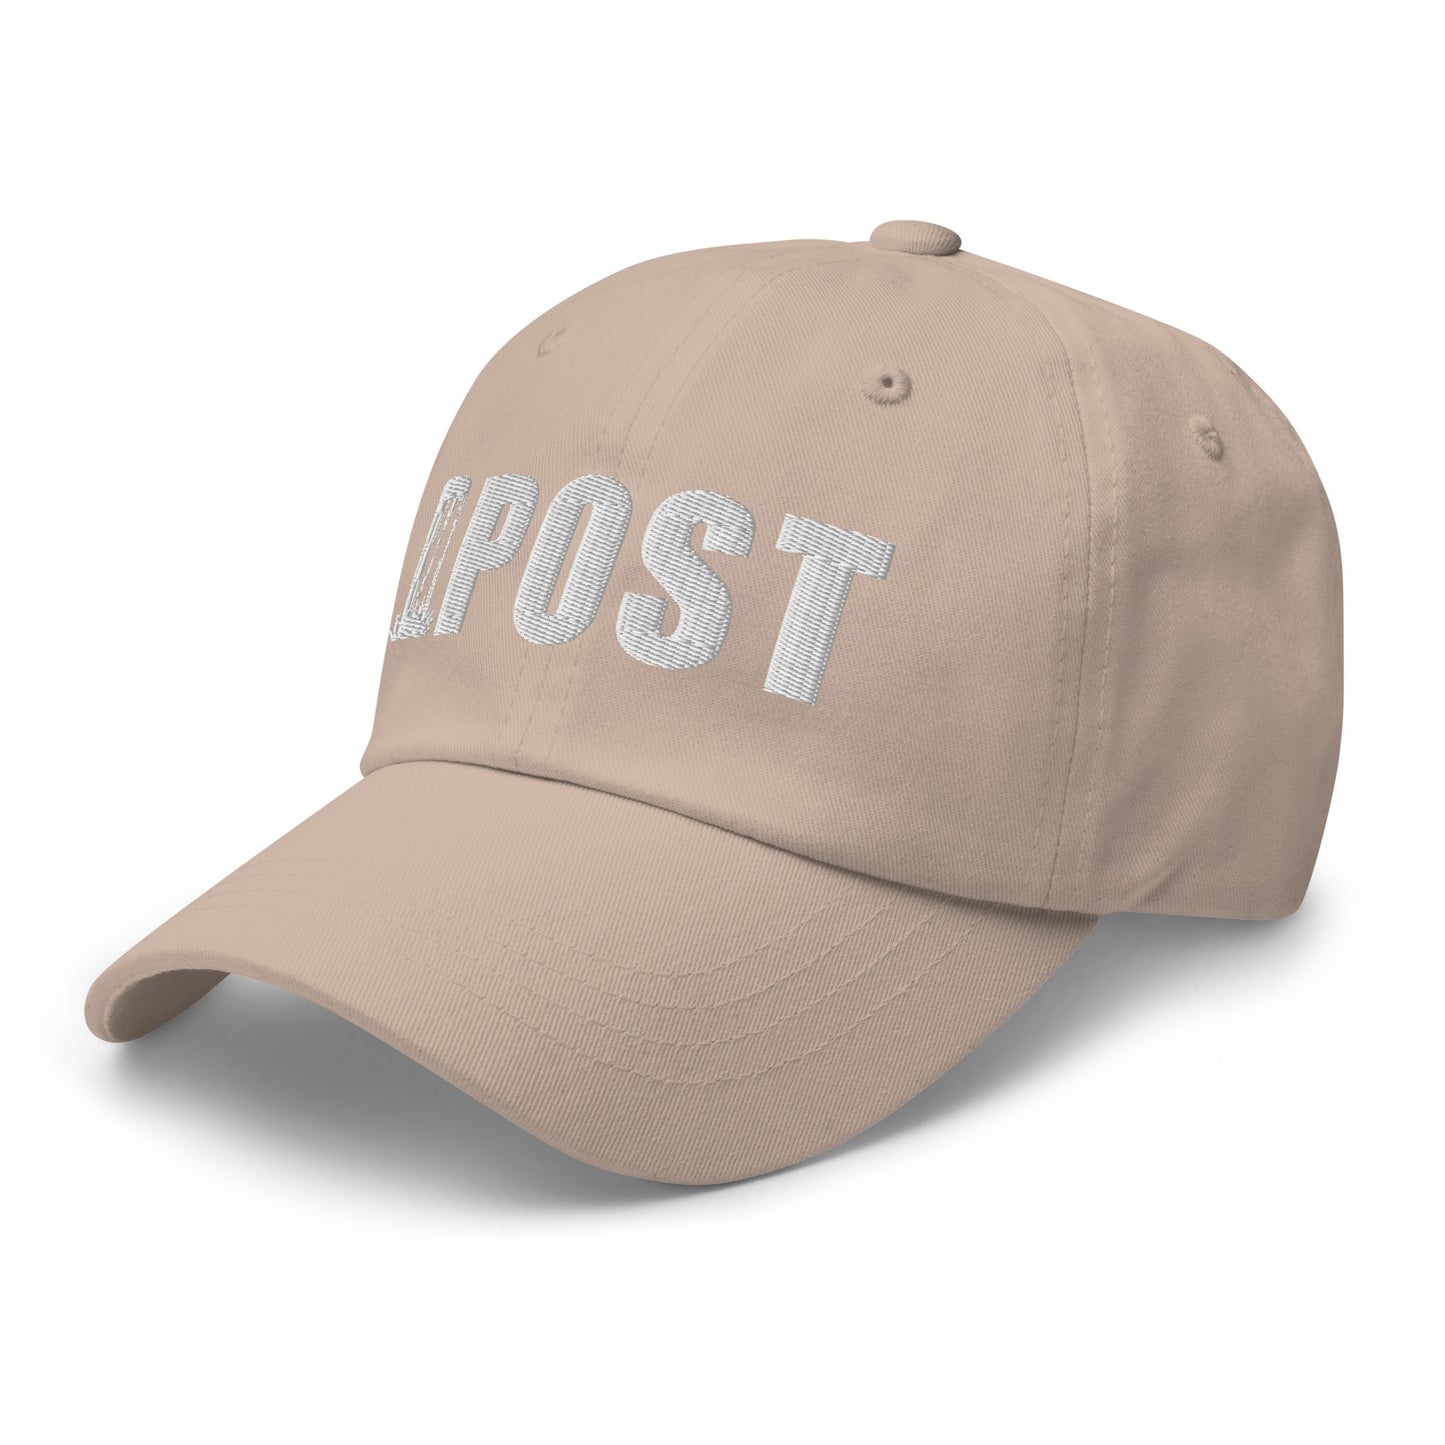 P.O.S.T. Dad Hat